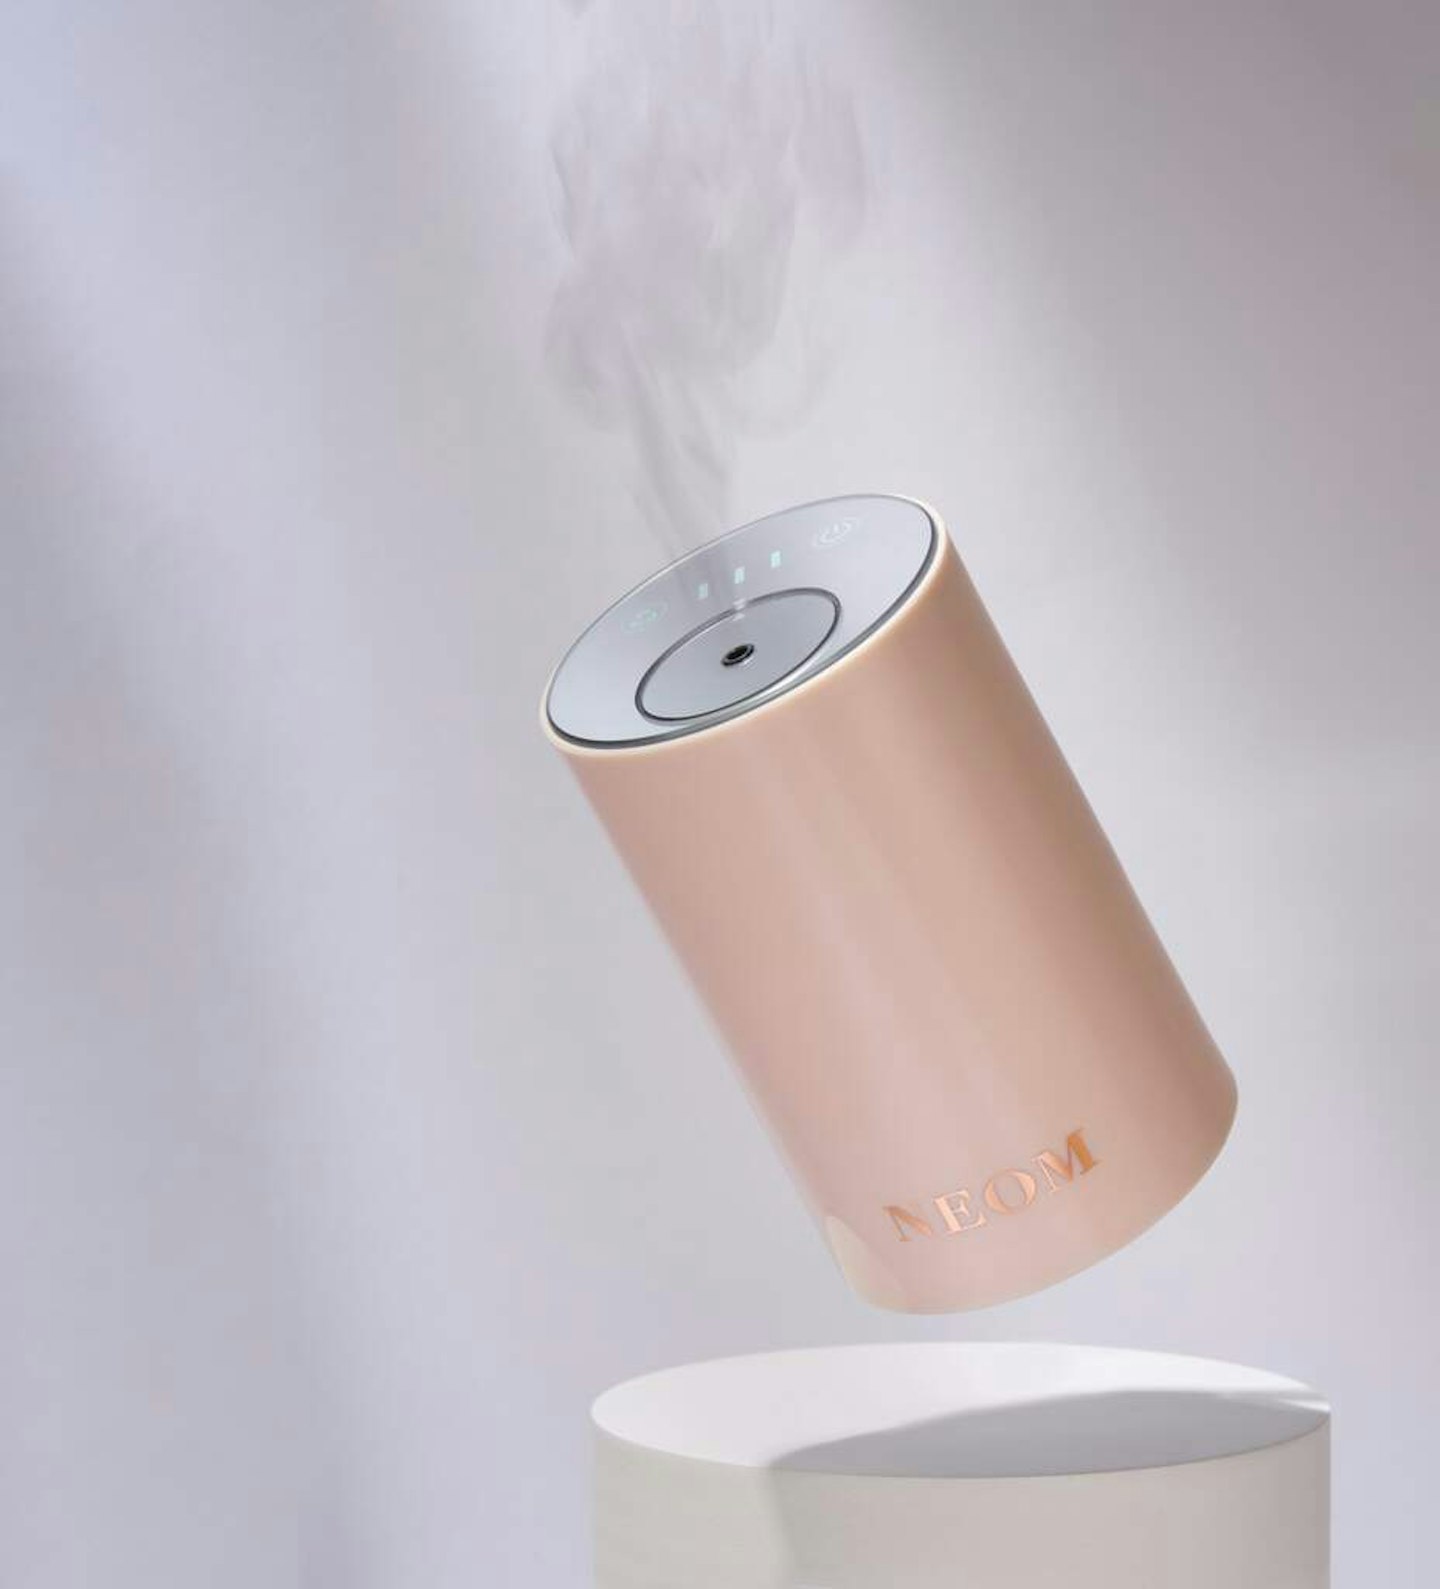 NEOM The Wellbeing Pod Mini Diffuser, £50